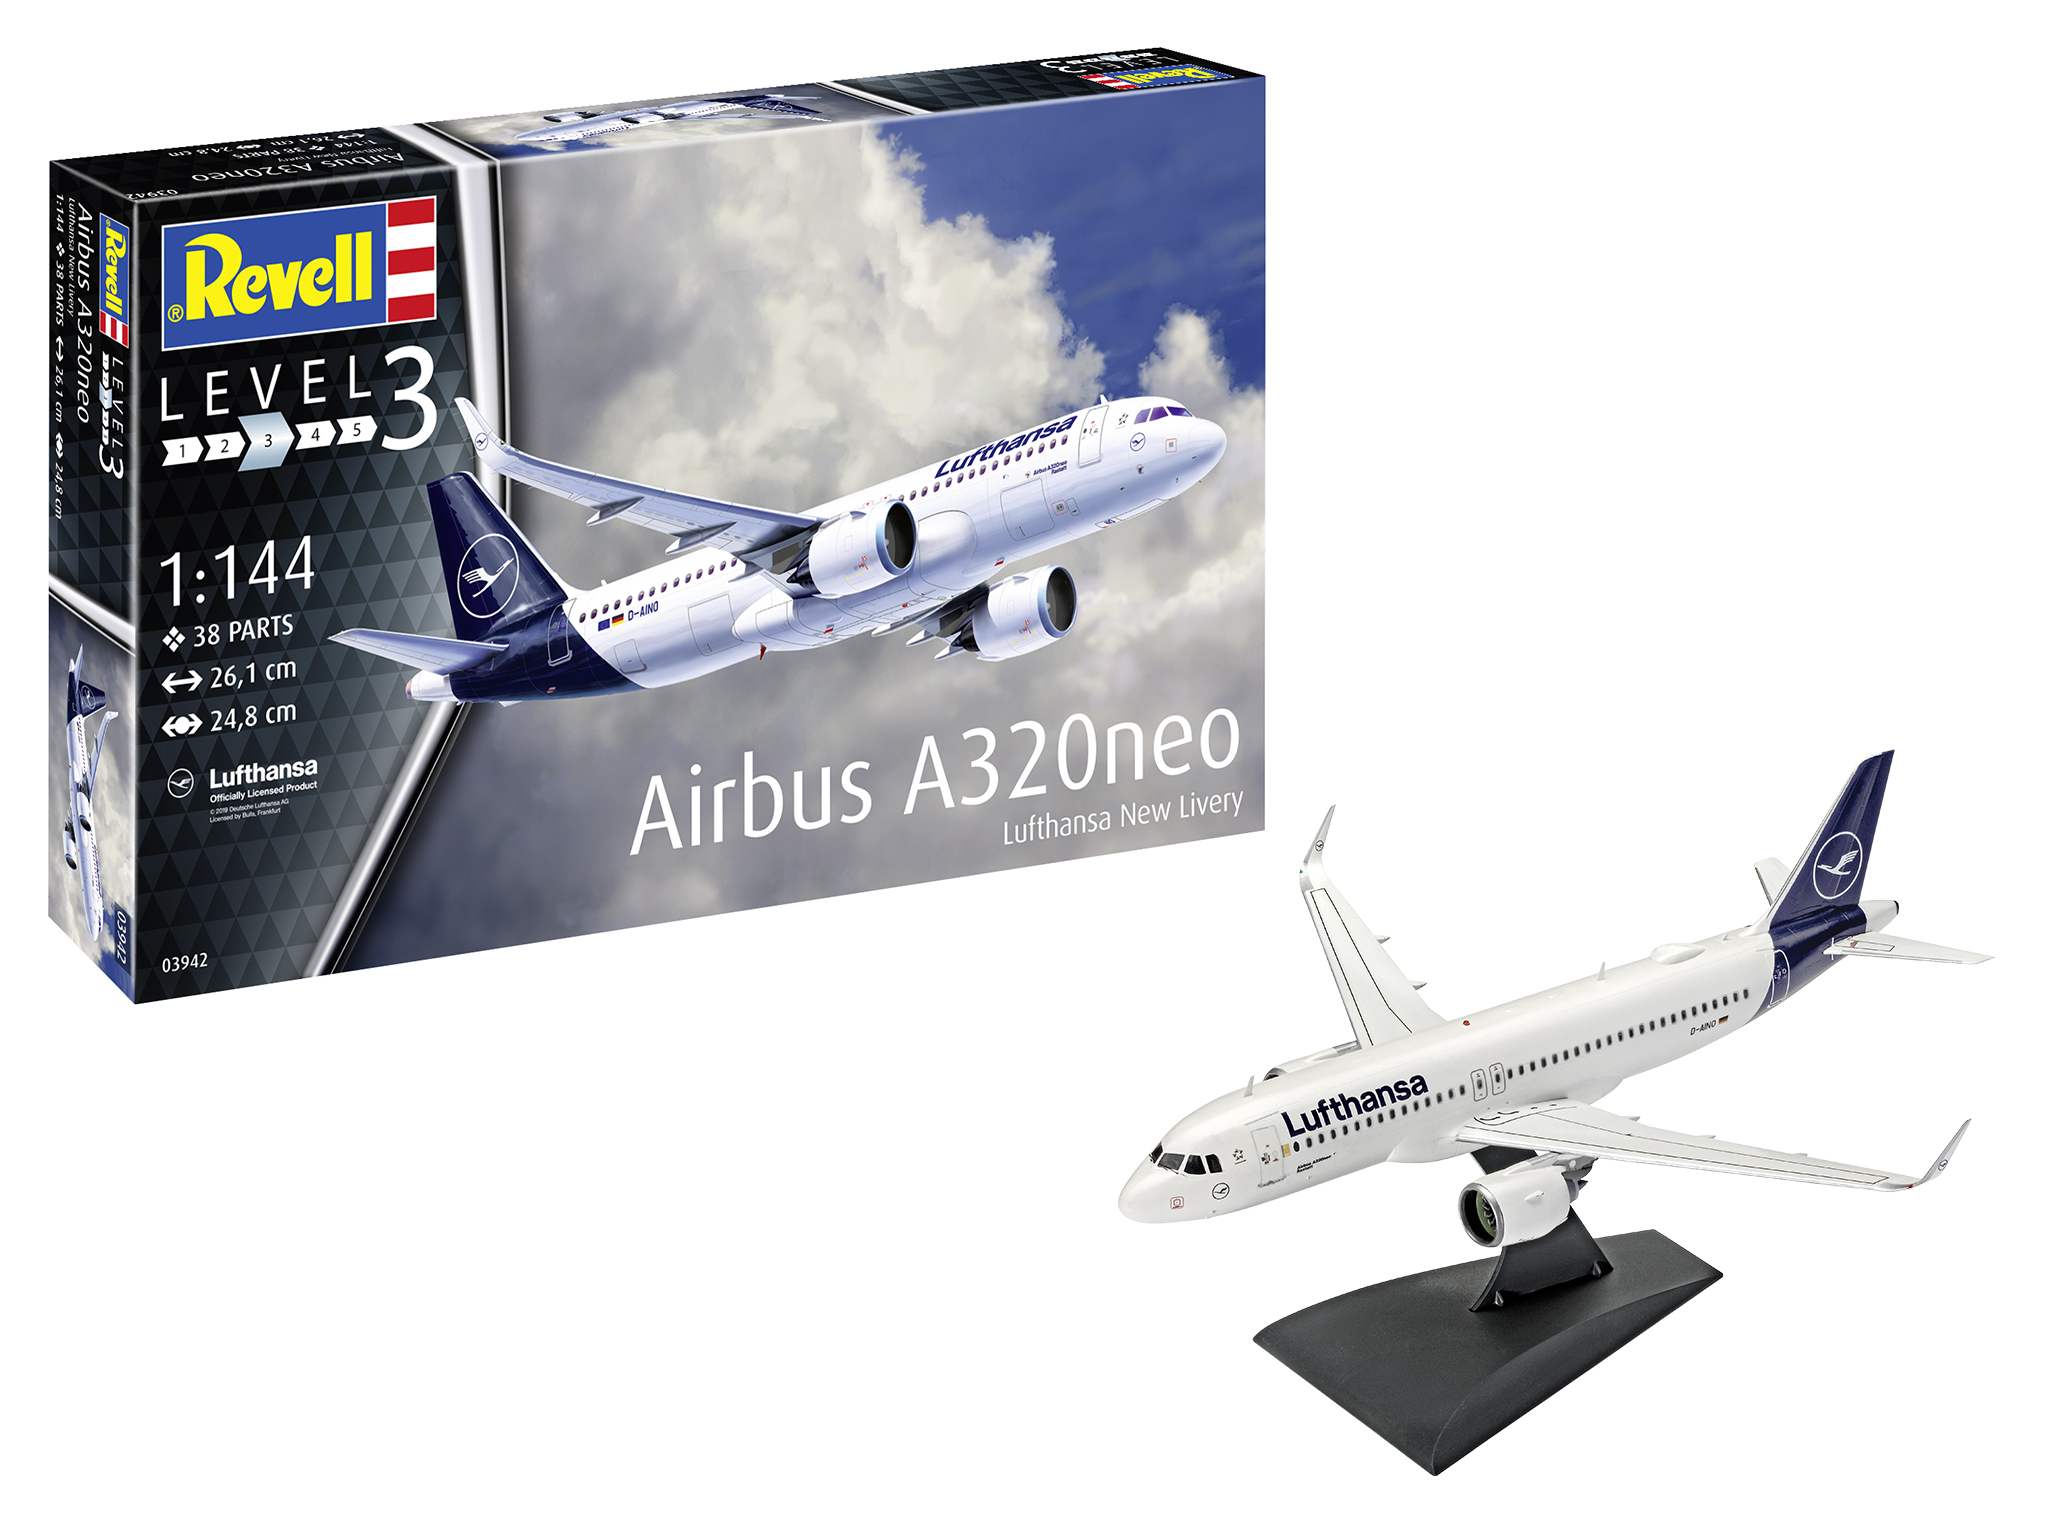 revell-03942-Airbus-A320neo-Lufthansa-New-Livery